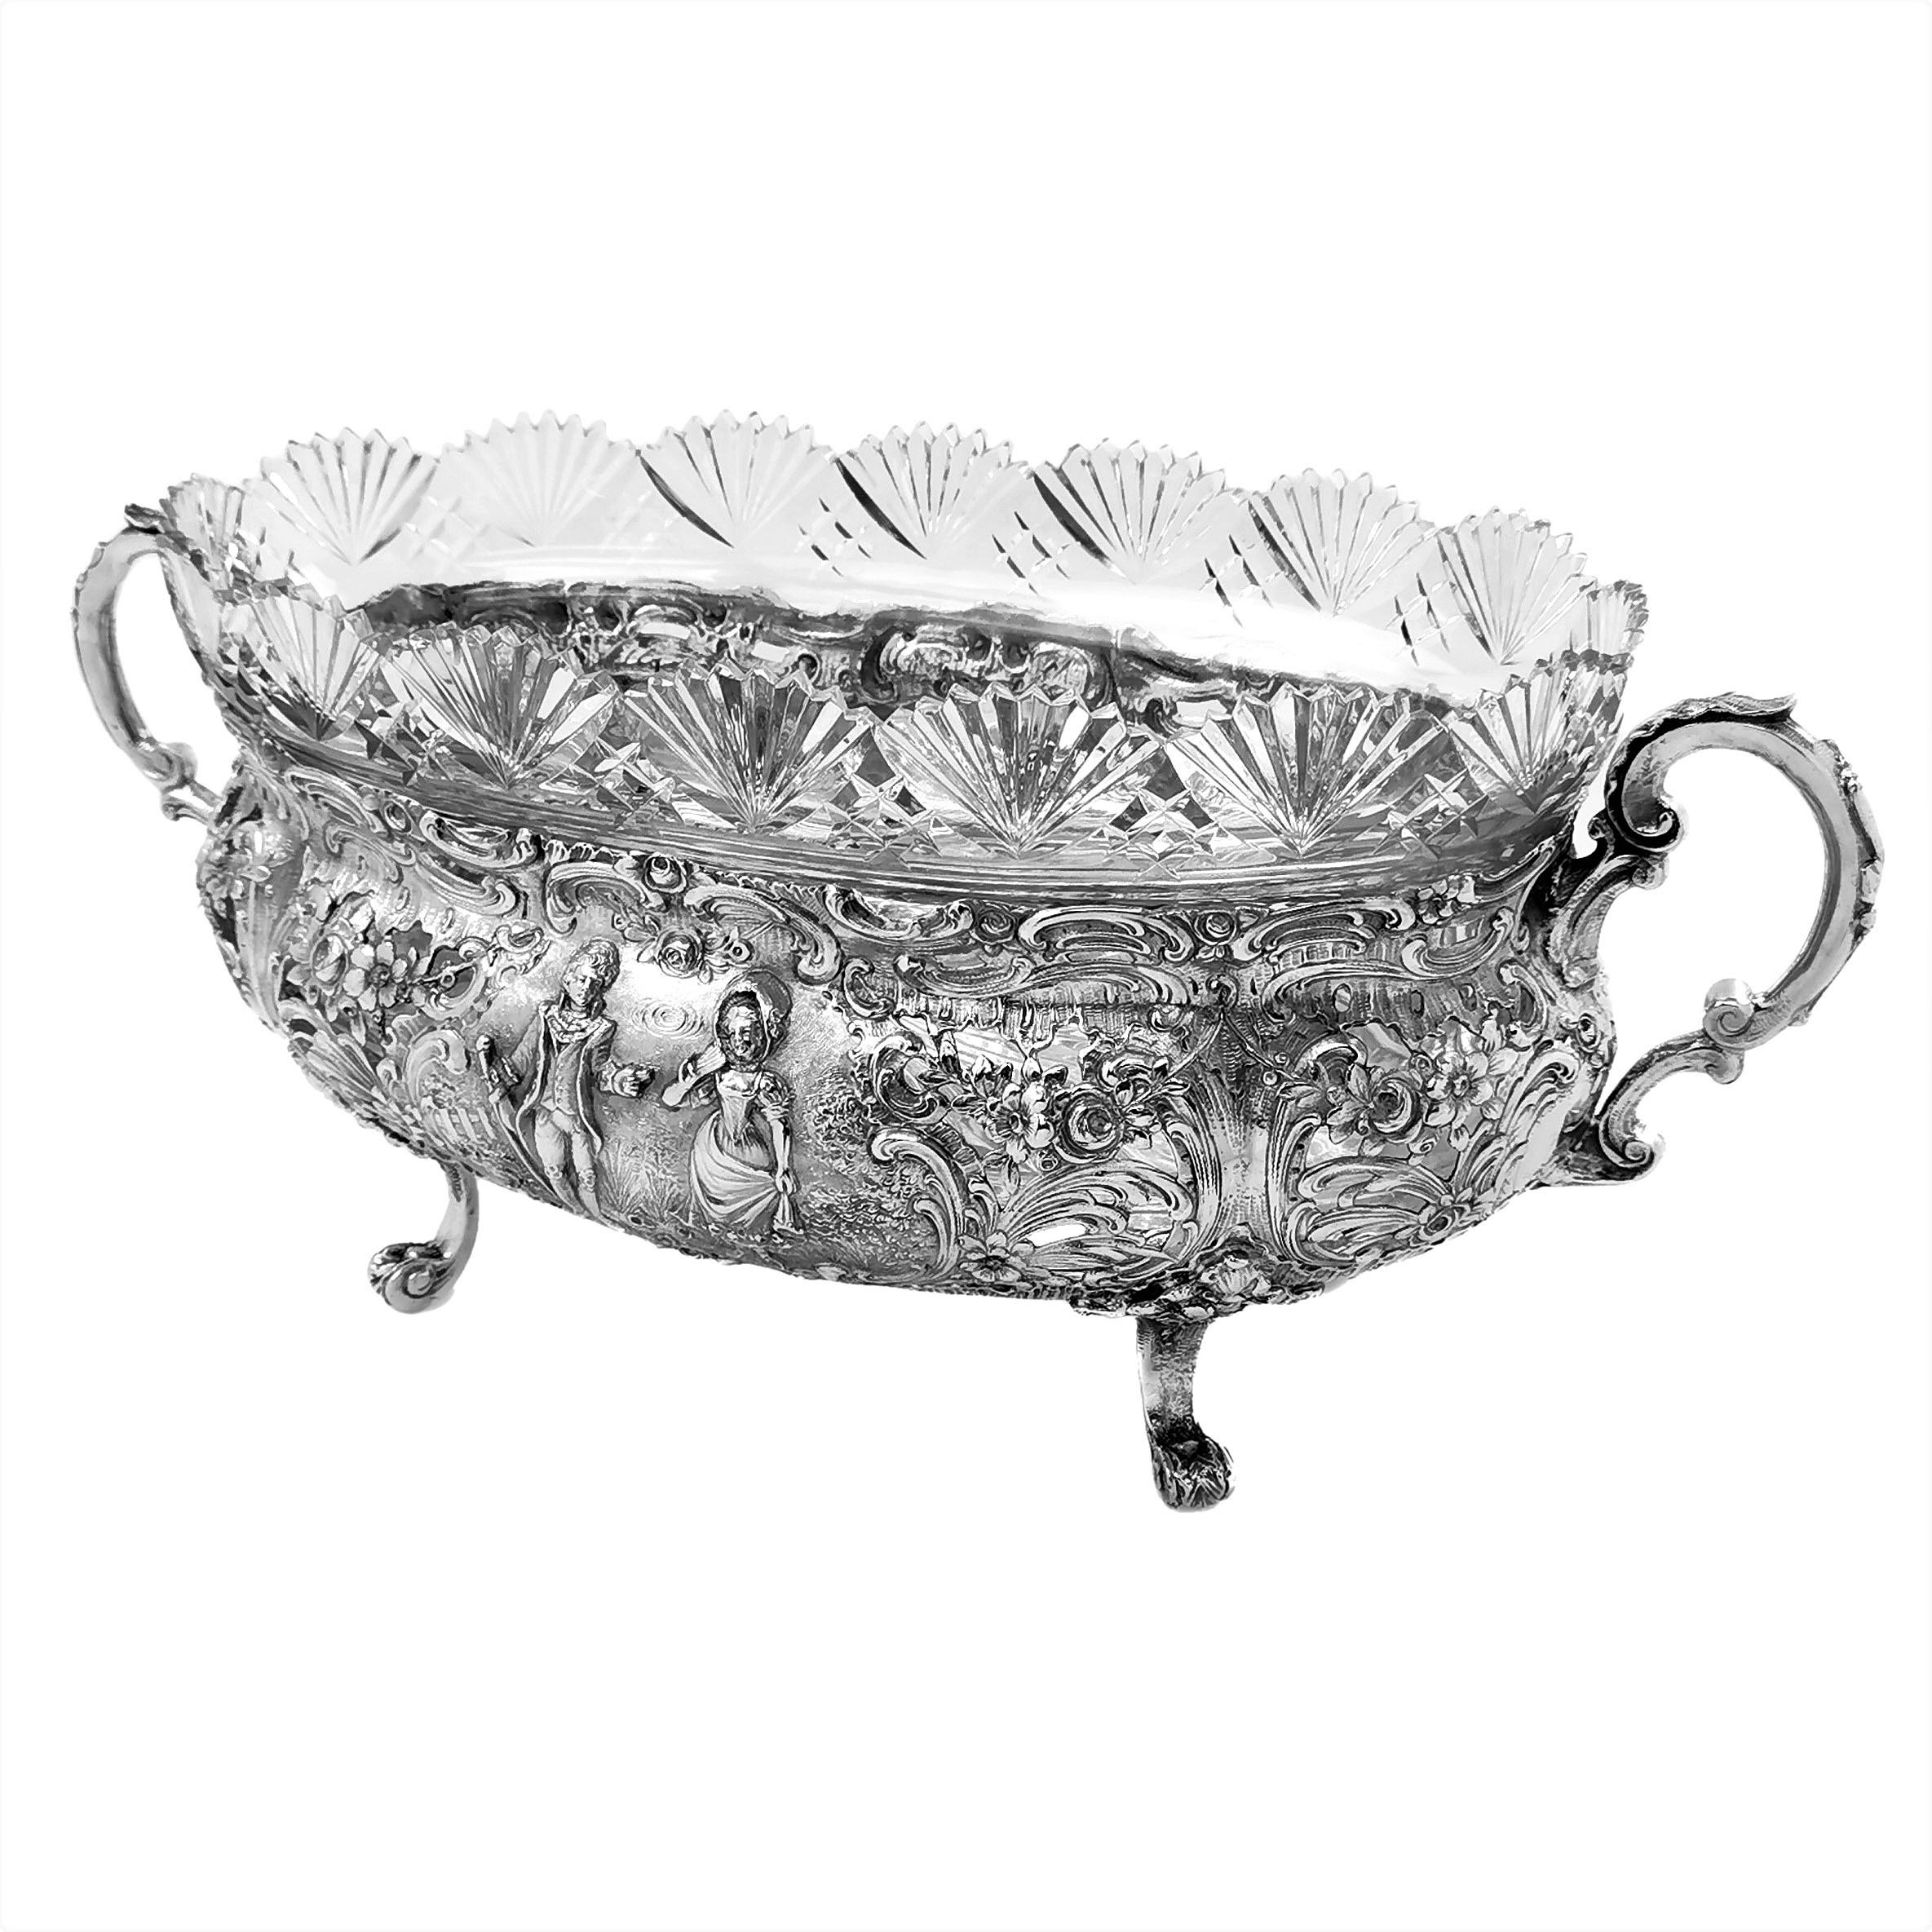 A magnificent antique German solid Silver Bowl with a ornate chased design on the body and two scroll handles. The chased designs show detailed classical scenes surrounded by elaborate floral and scroll designs. The Bowl has a fitted clear glass